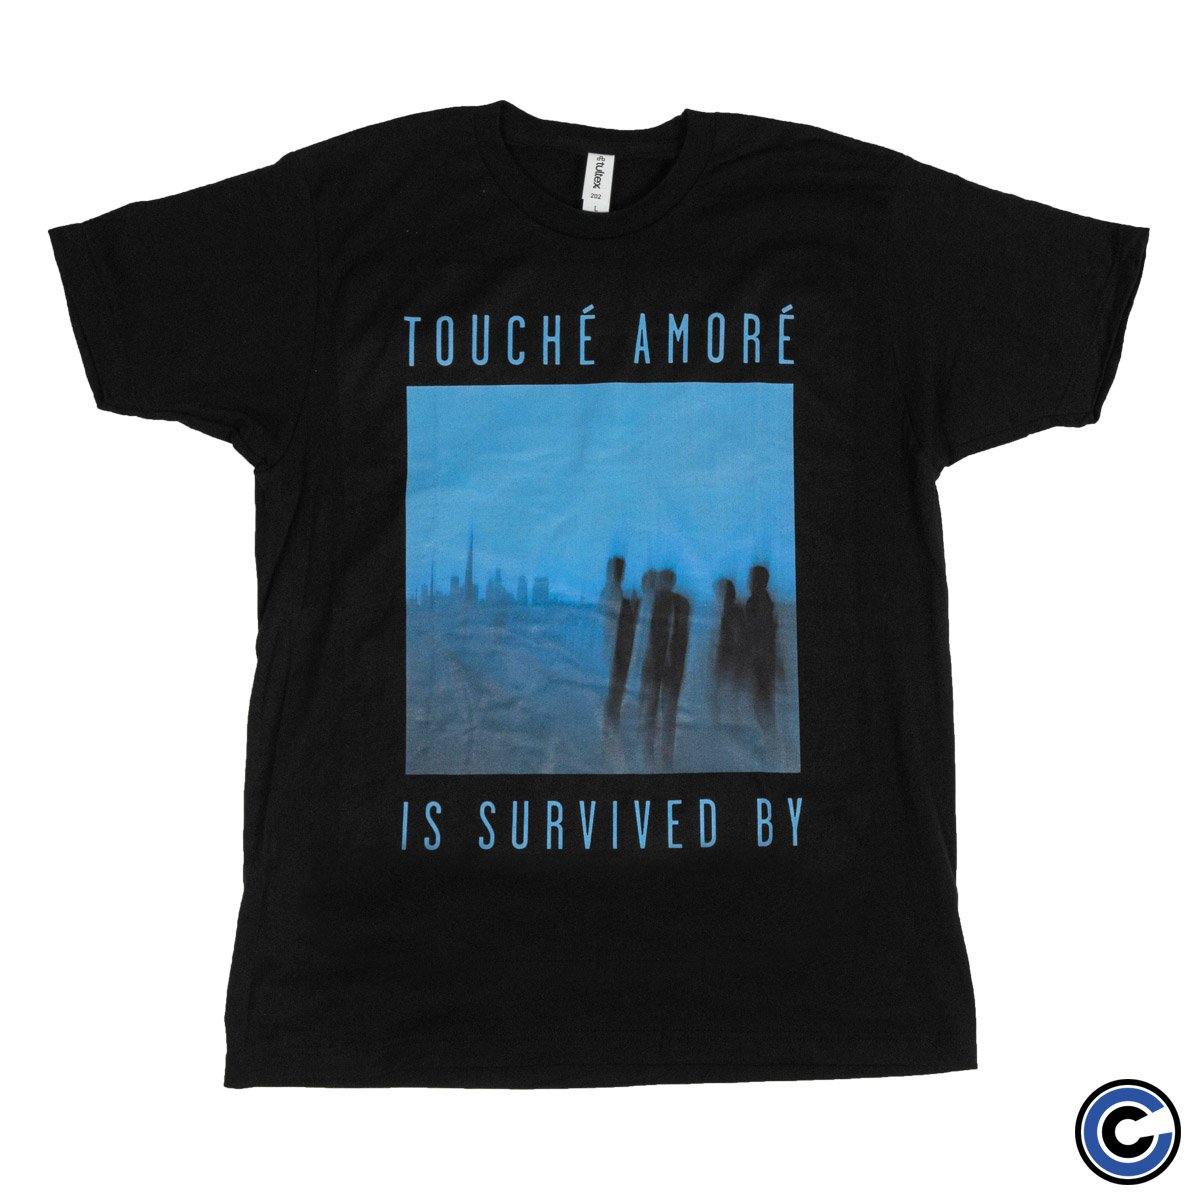 Buy – Touche Amore "Is Survived By" Shirt – Band & Music Merch – Cold Cuts Merch